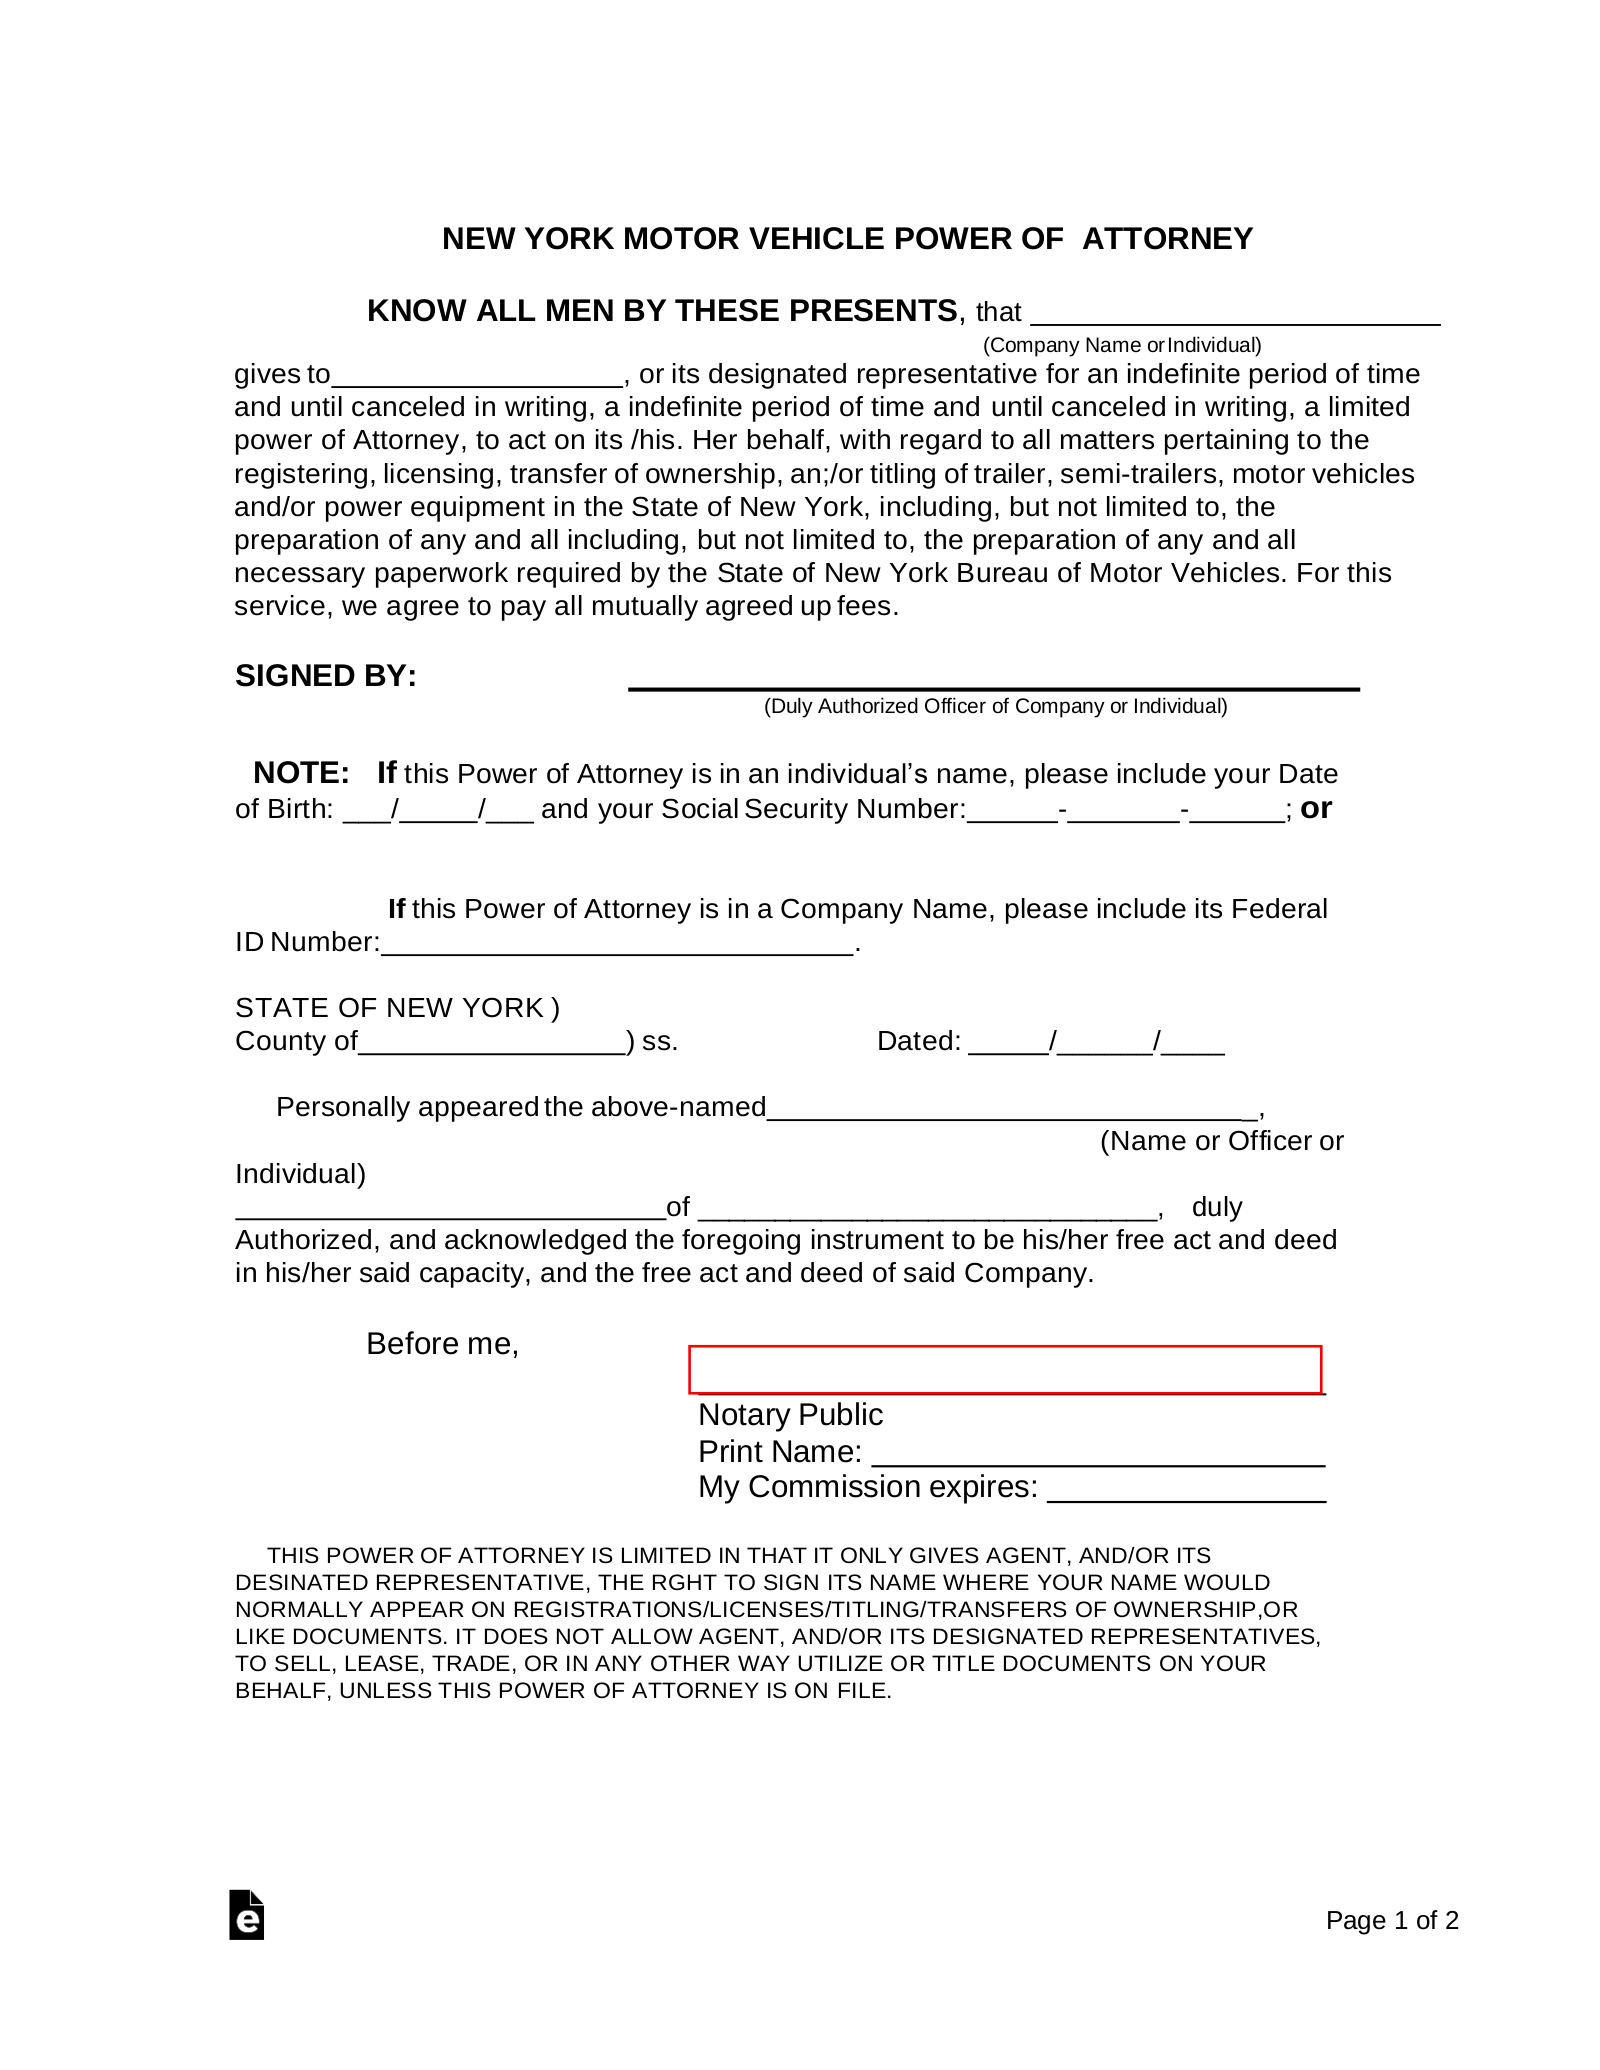 New York Motor Vehicle Power of Attorney Form